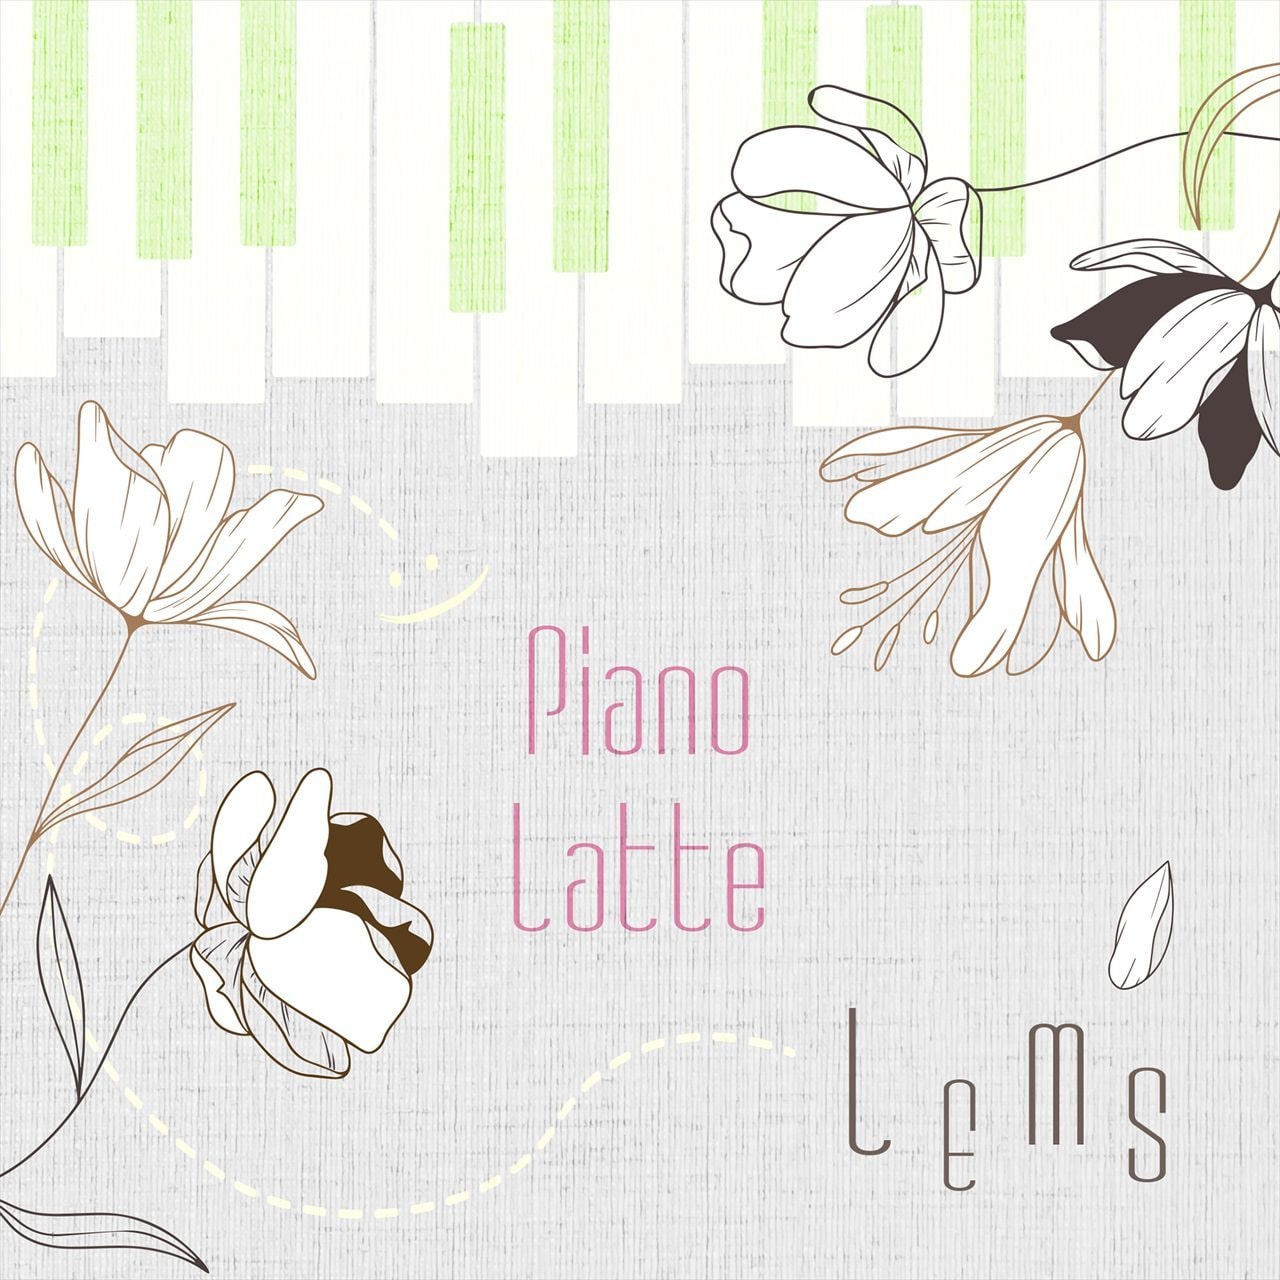 LEMS - Piano Latte Jazzy Mellow Japanese Instrumental Hiphop by beatmaker